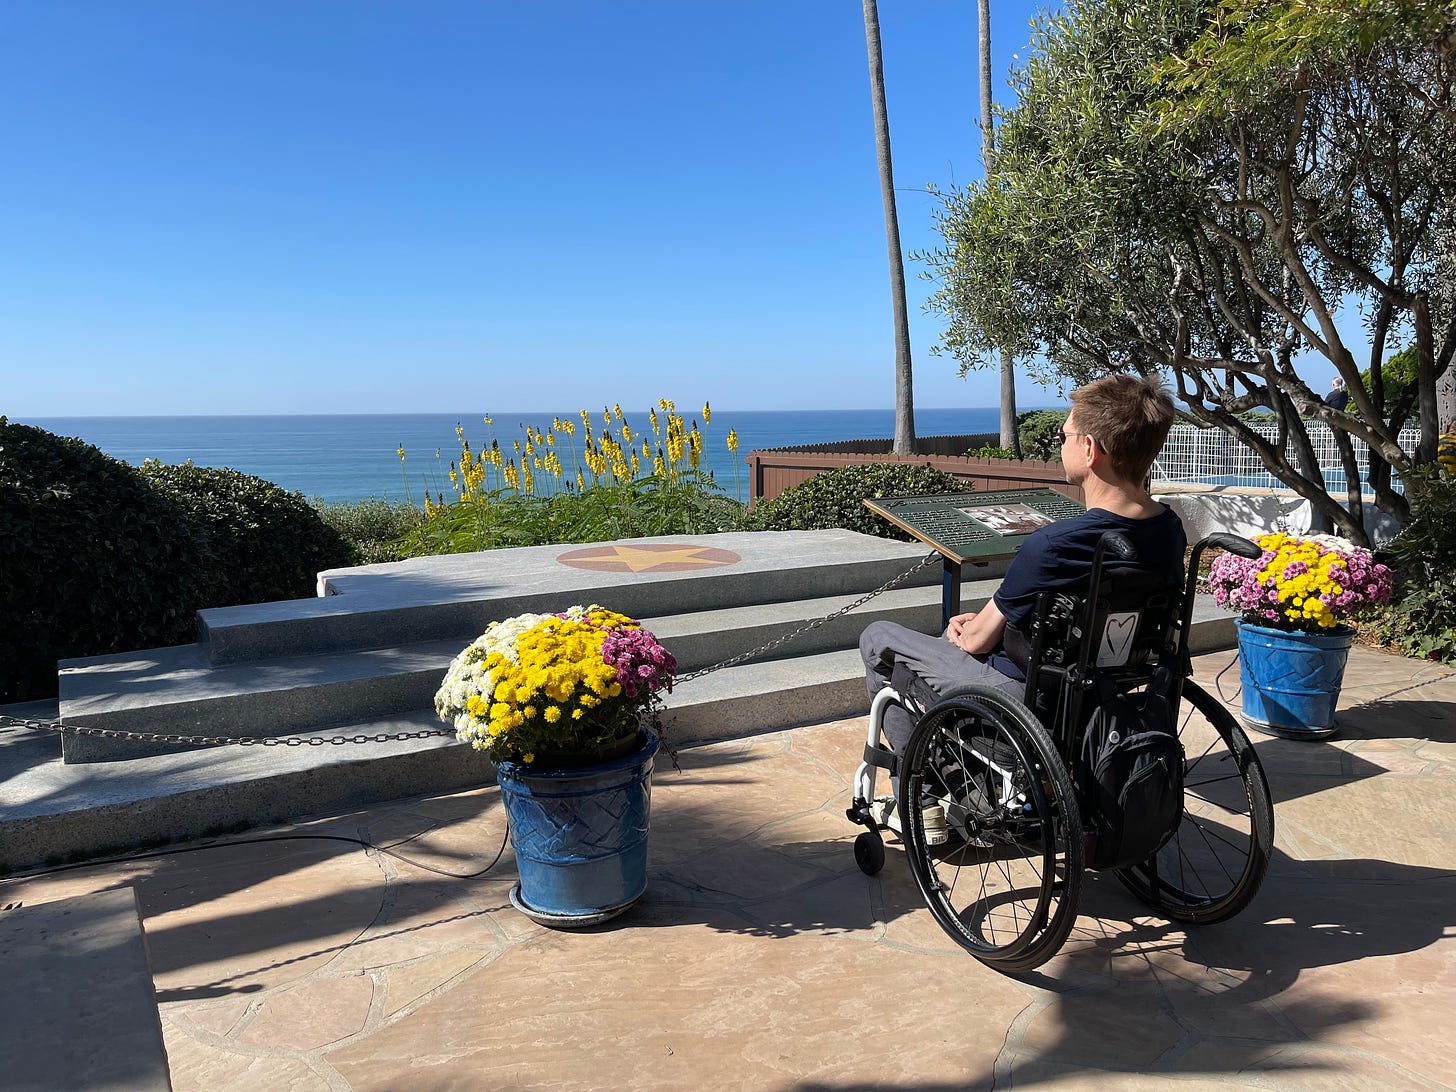 Kabir, in his wheelchair, Peering over the bluff to the ocean, next to the memorial plaque in the Self-Realization meditation gardens in Encinitas California.